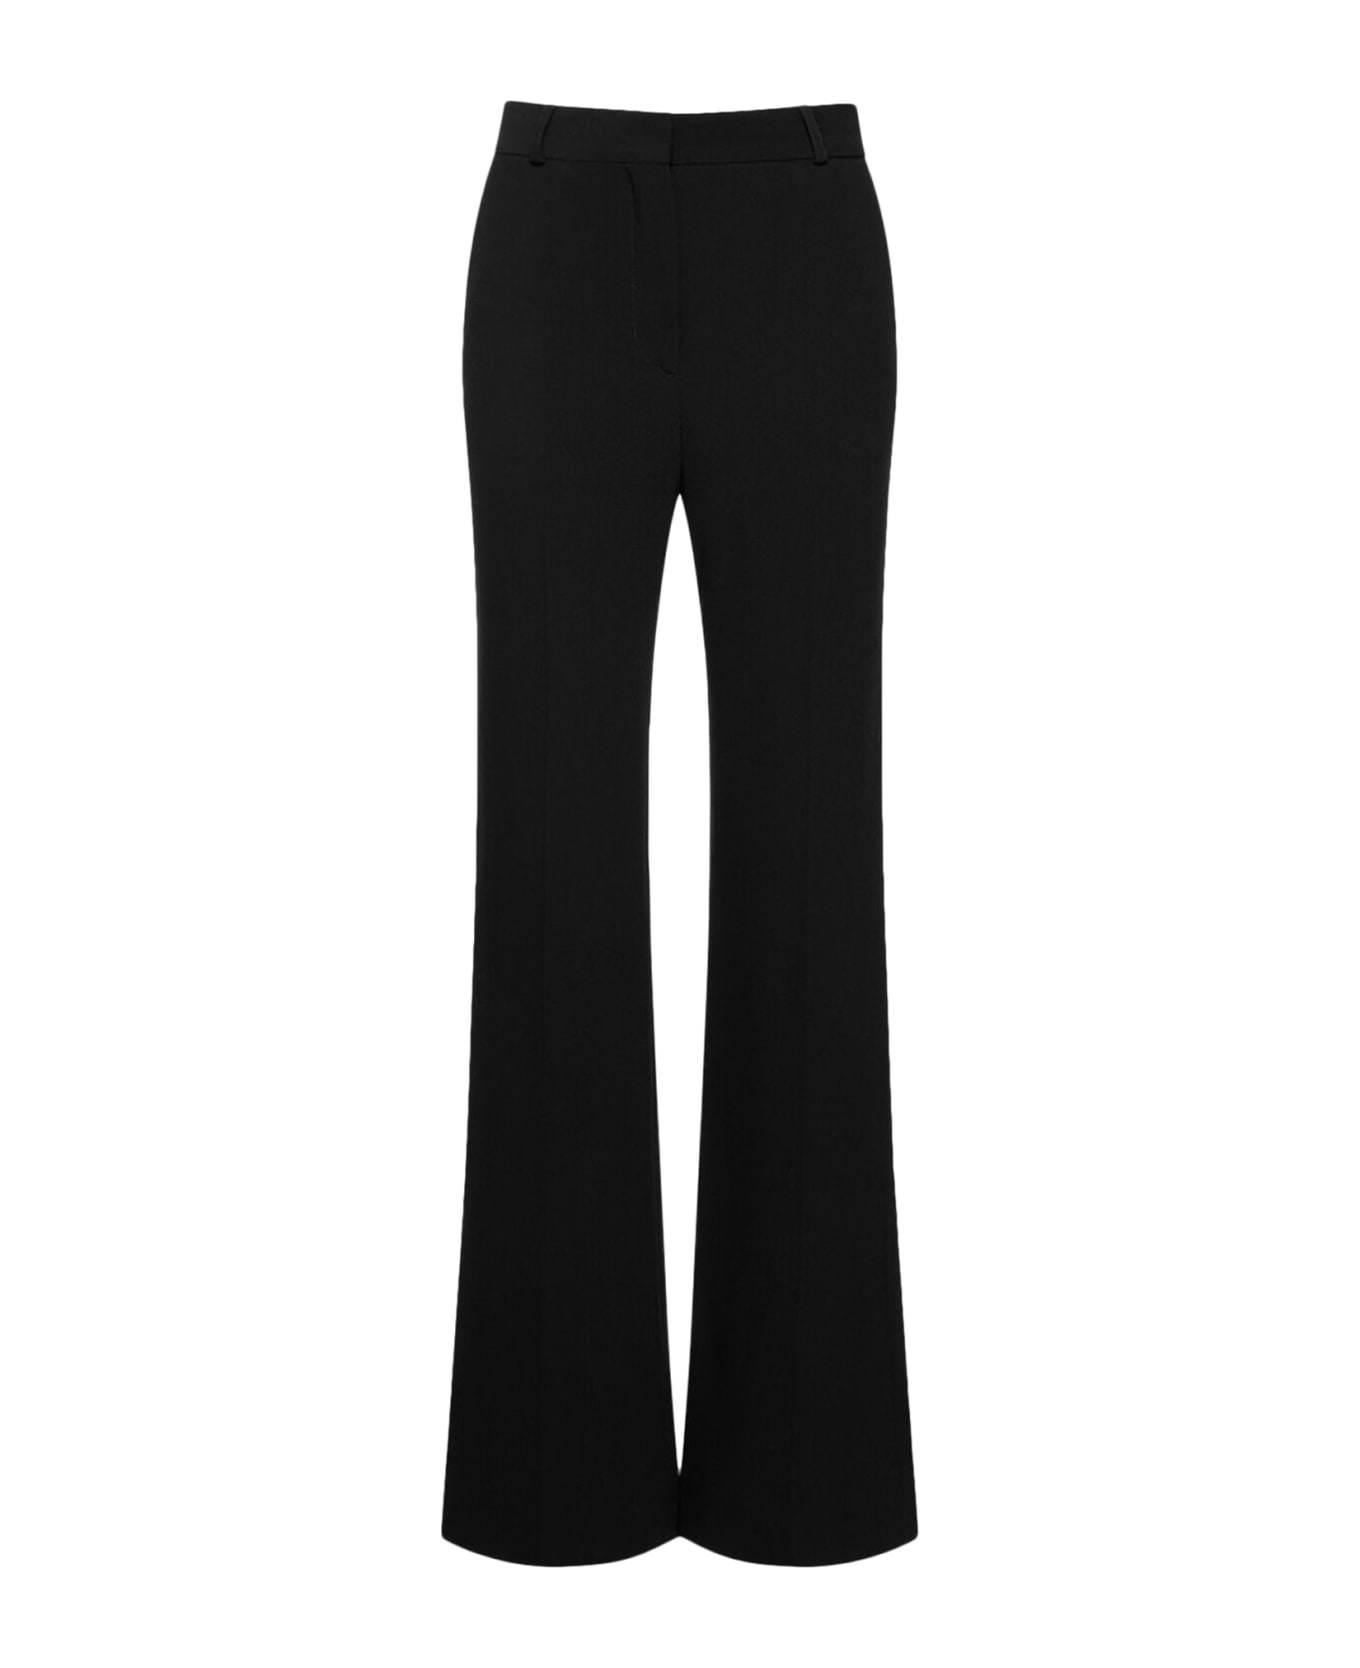 Totême Flared Evening Trousers - Black ボトムス